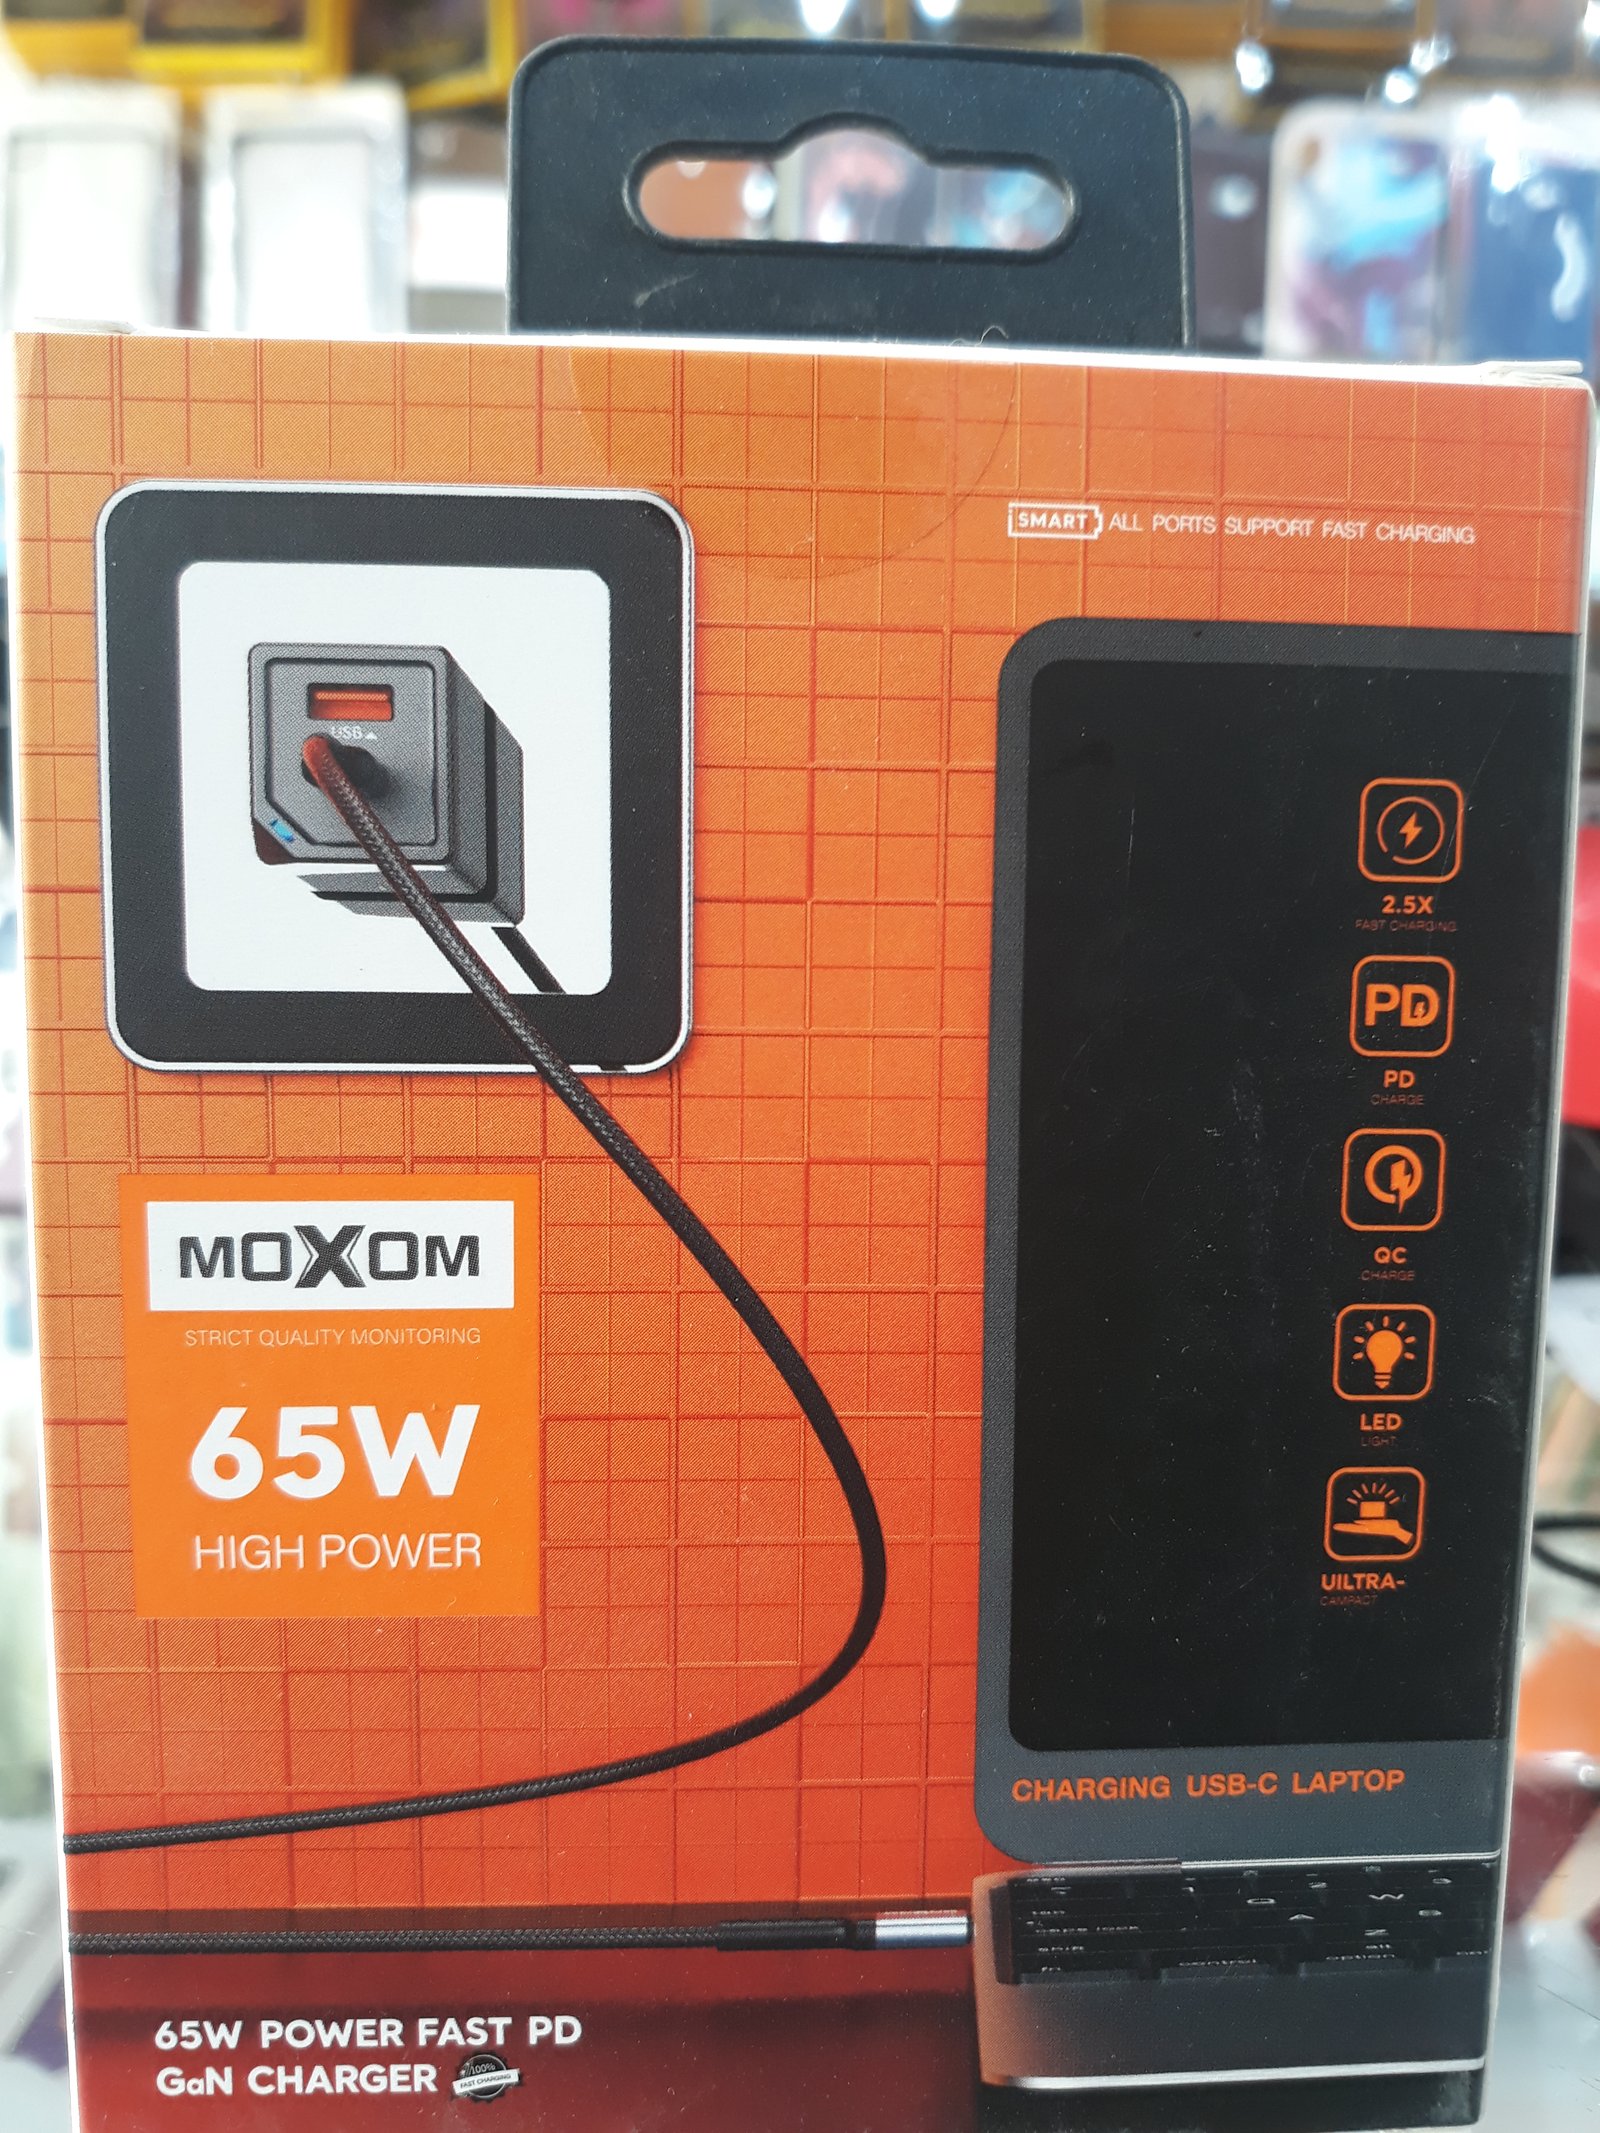 MoxoM 65W Power Fast PD Charger